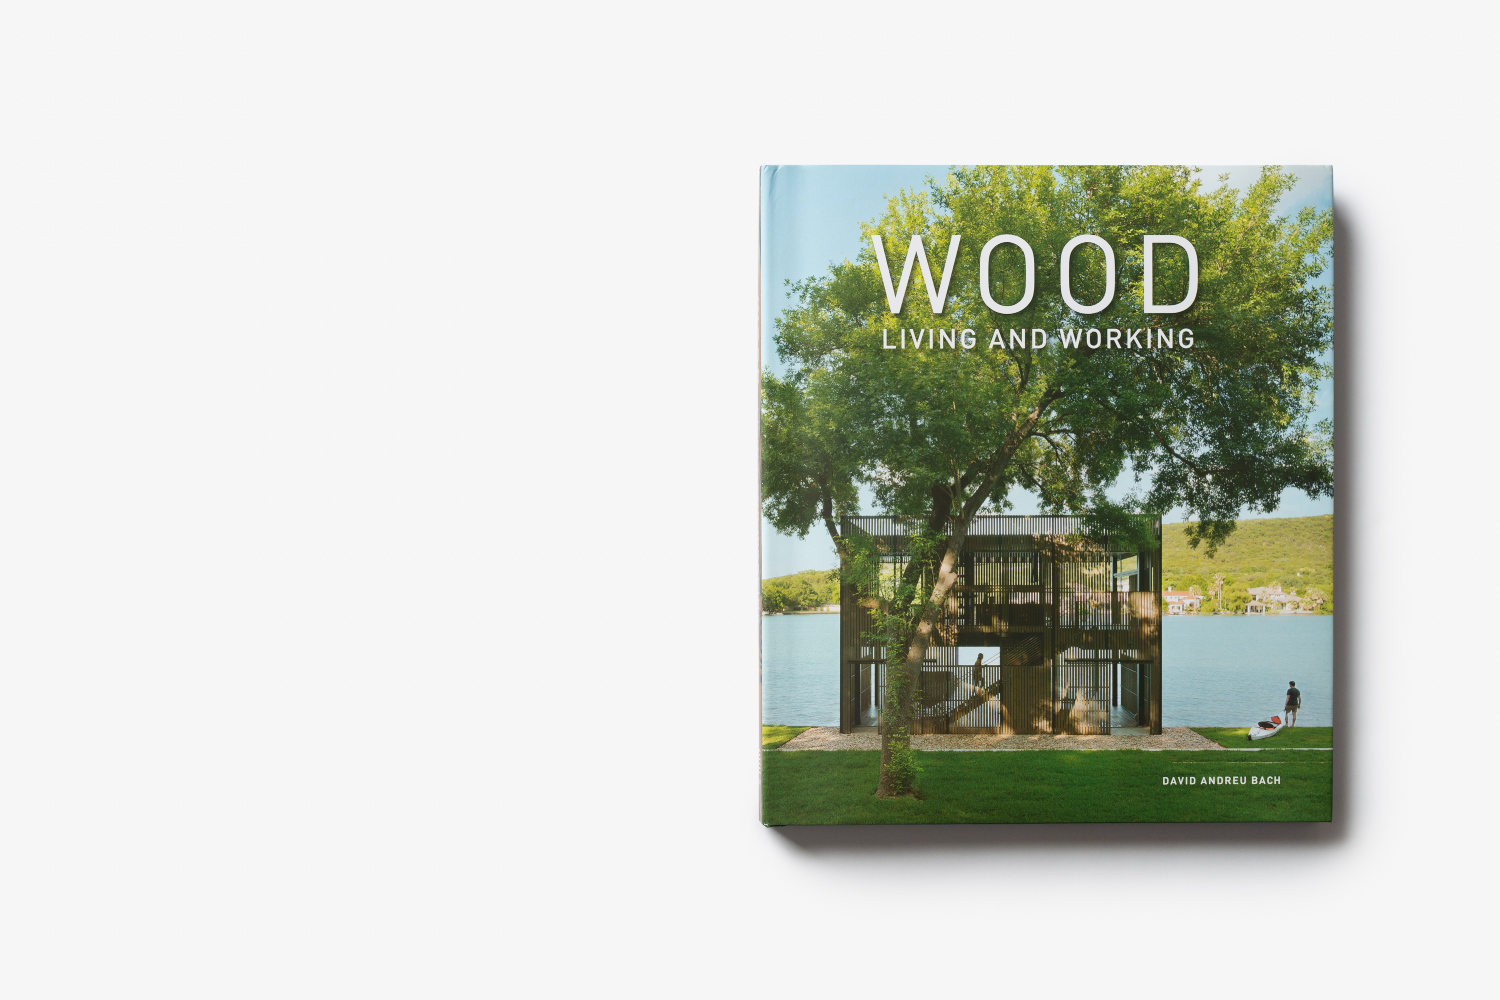 Birdseye Featured in “Wood – Living and Working”